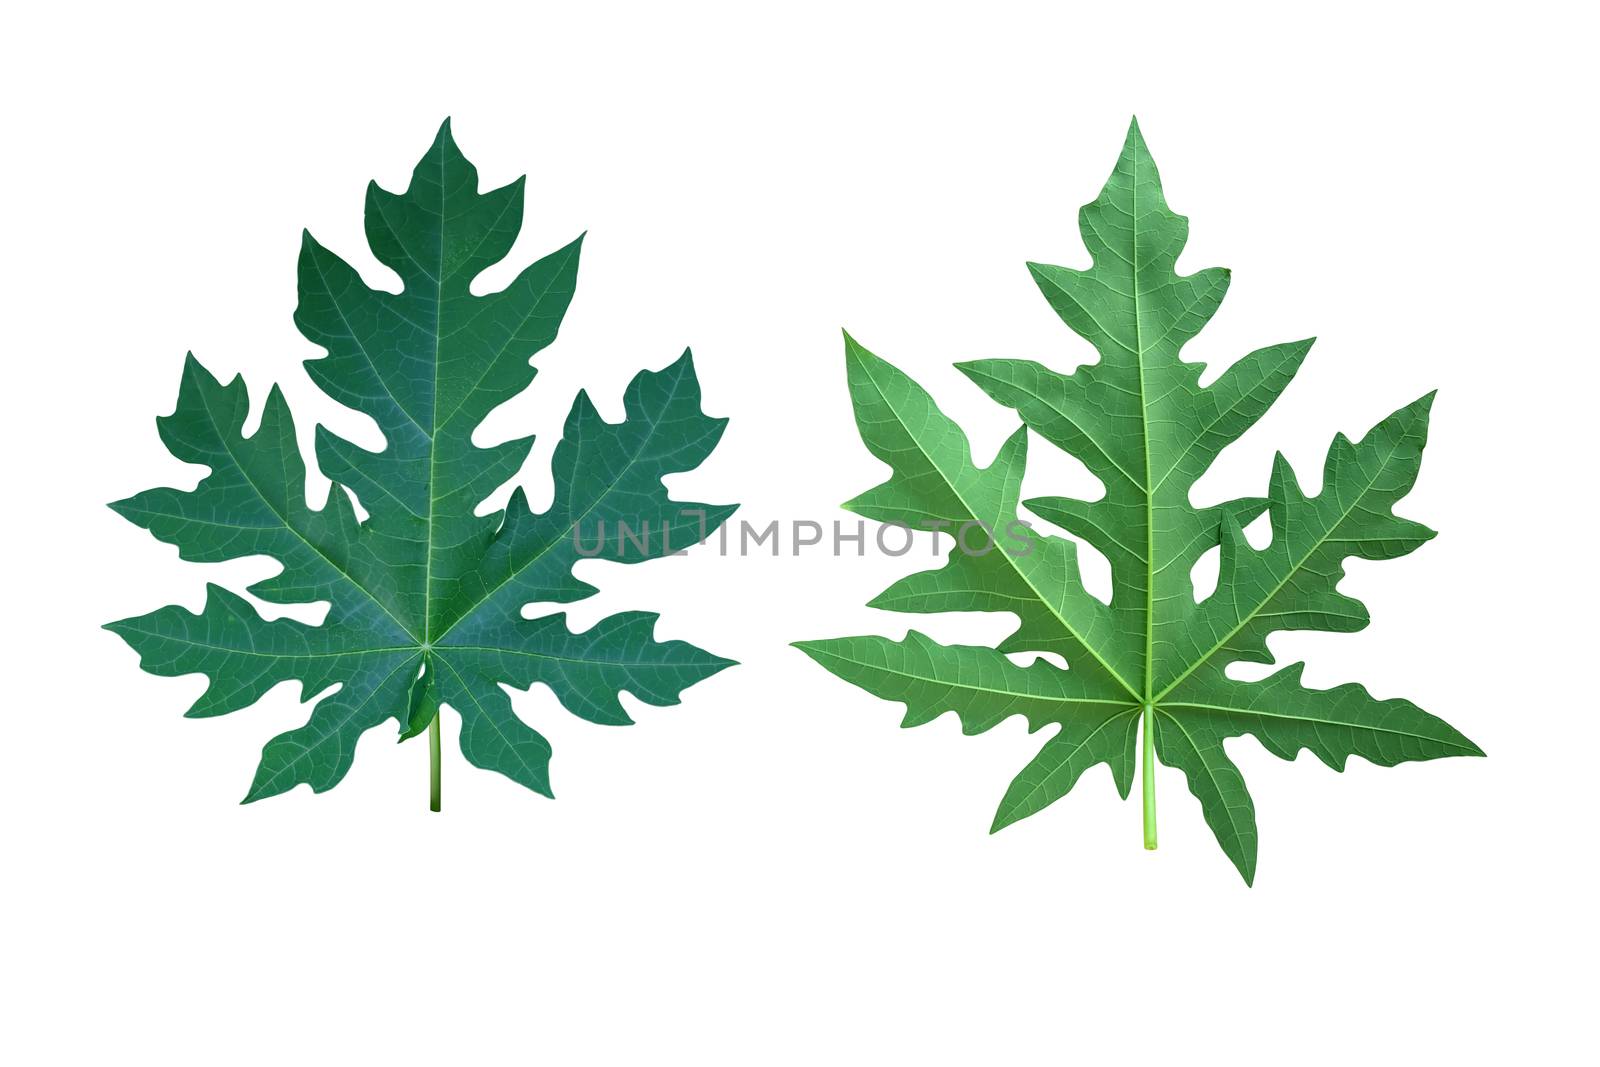 Papaya leaves  isolated on white background with clipping path by cyberspace